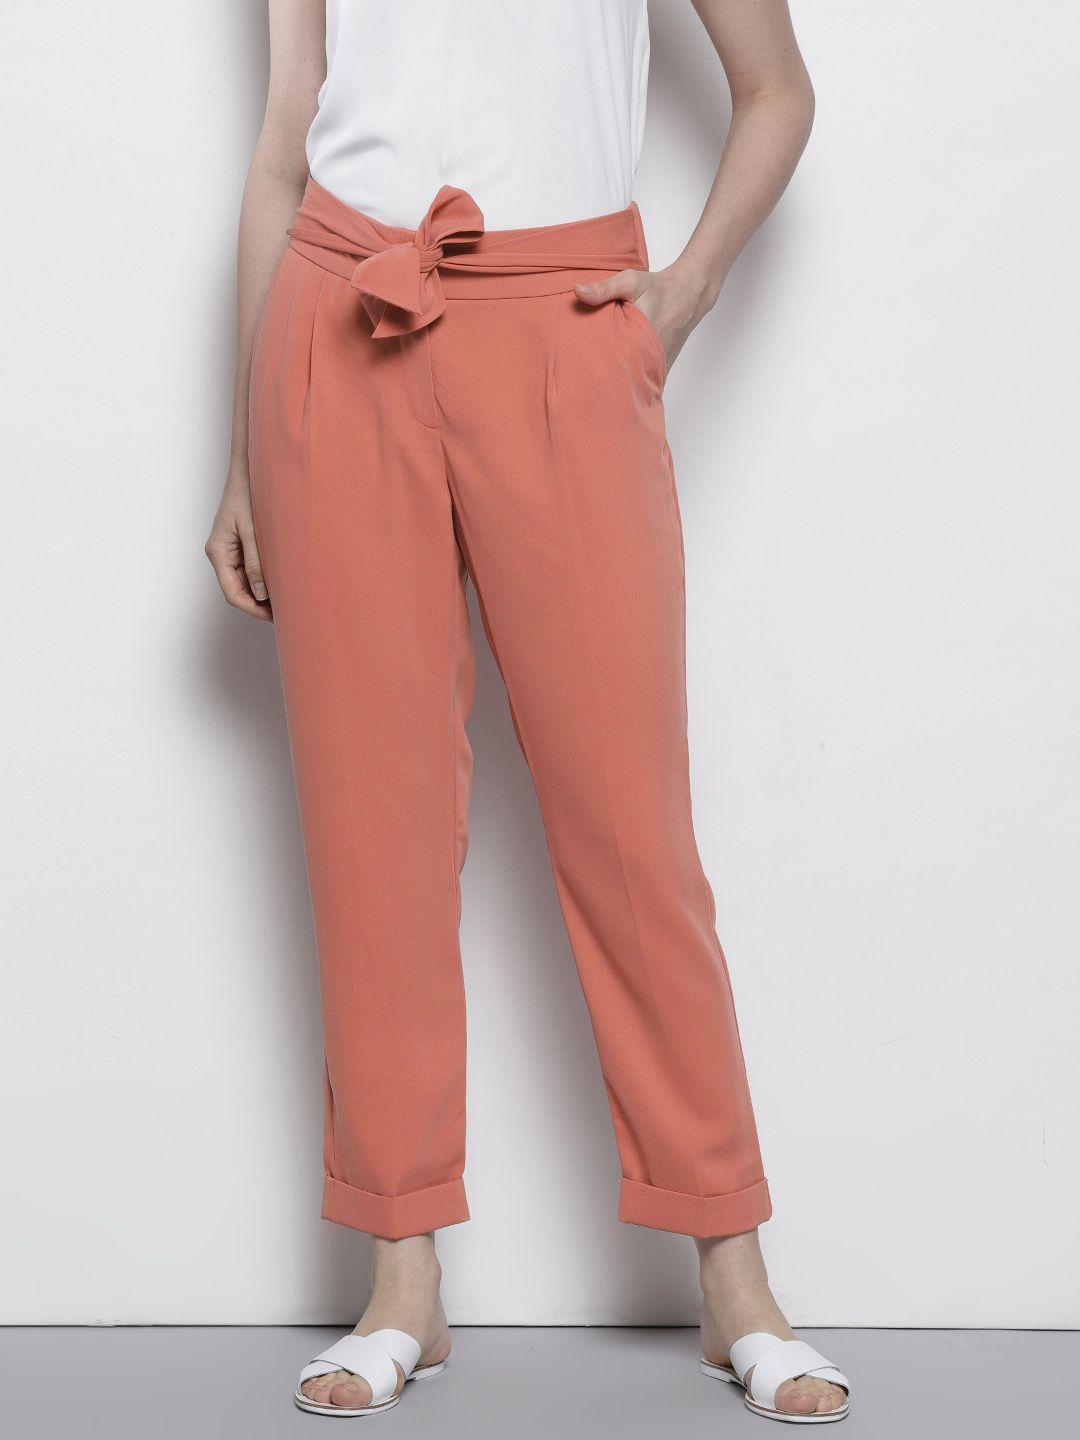 dorothy perkins women peach-coloured tapered fit solid cropped trousers